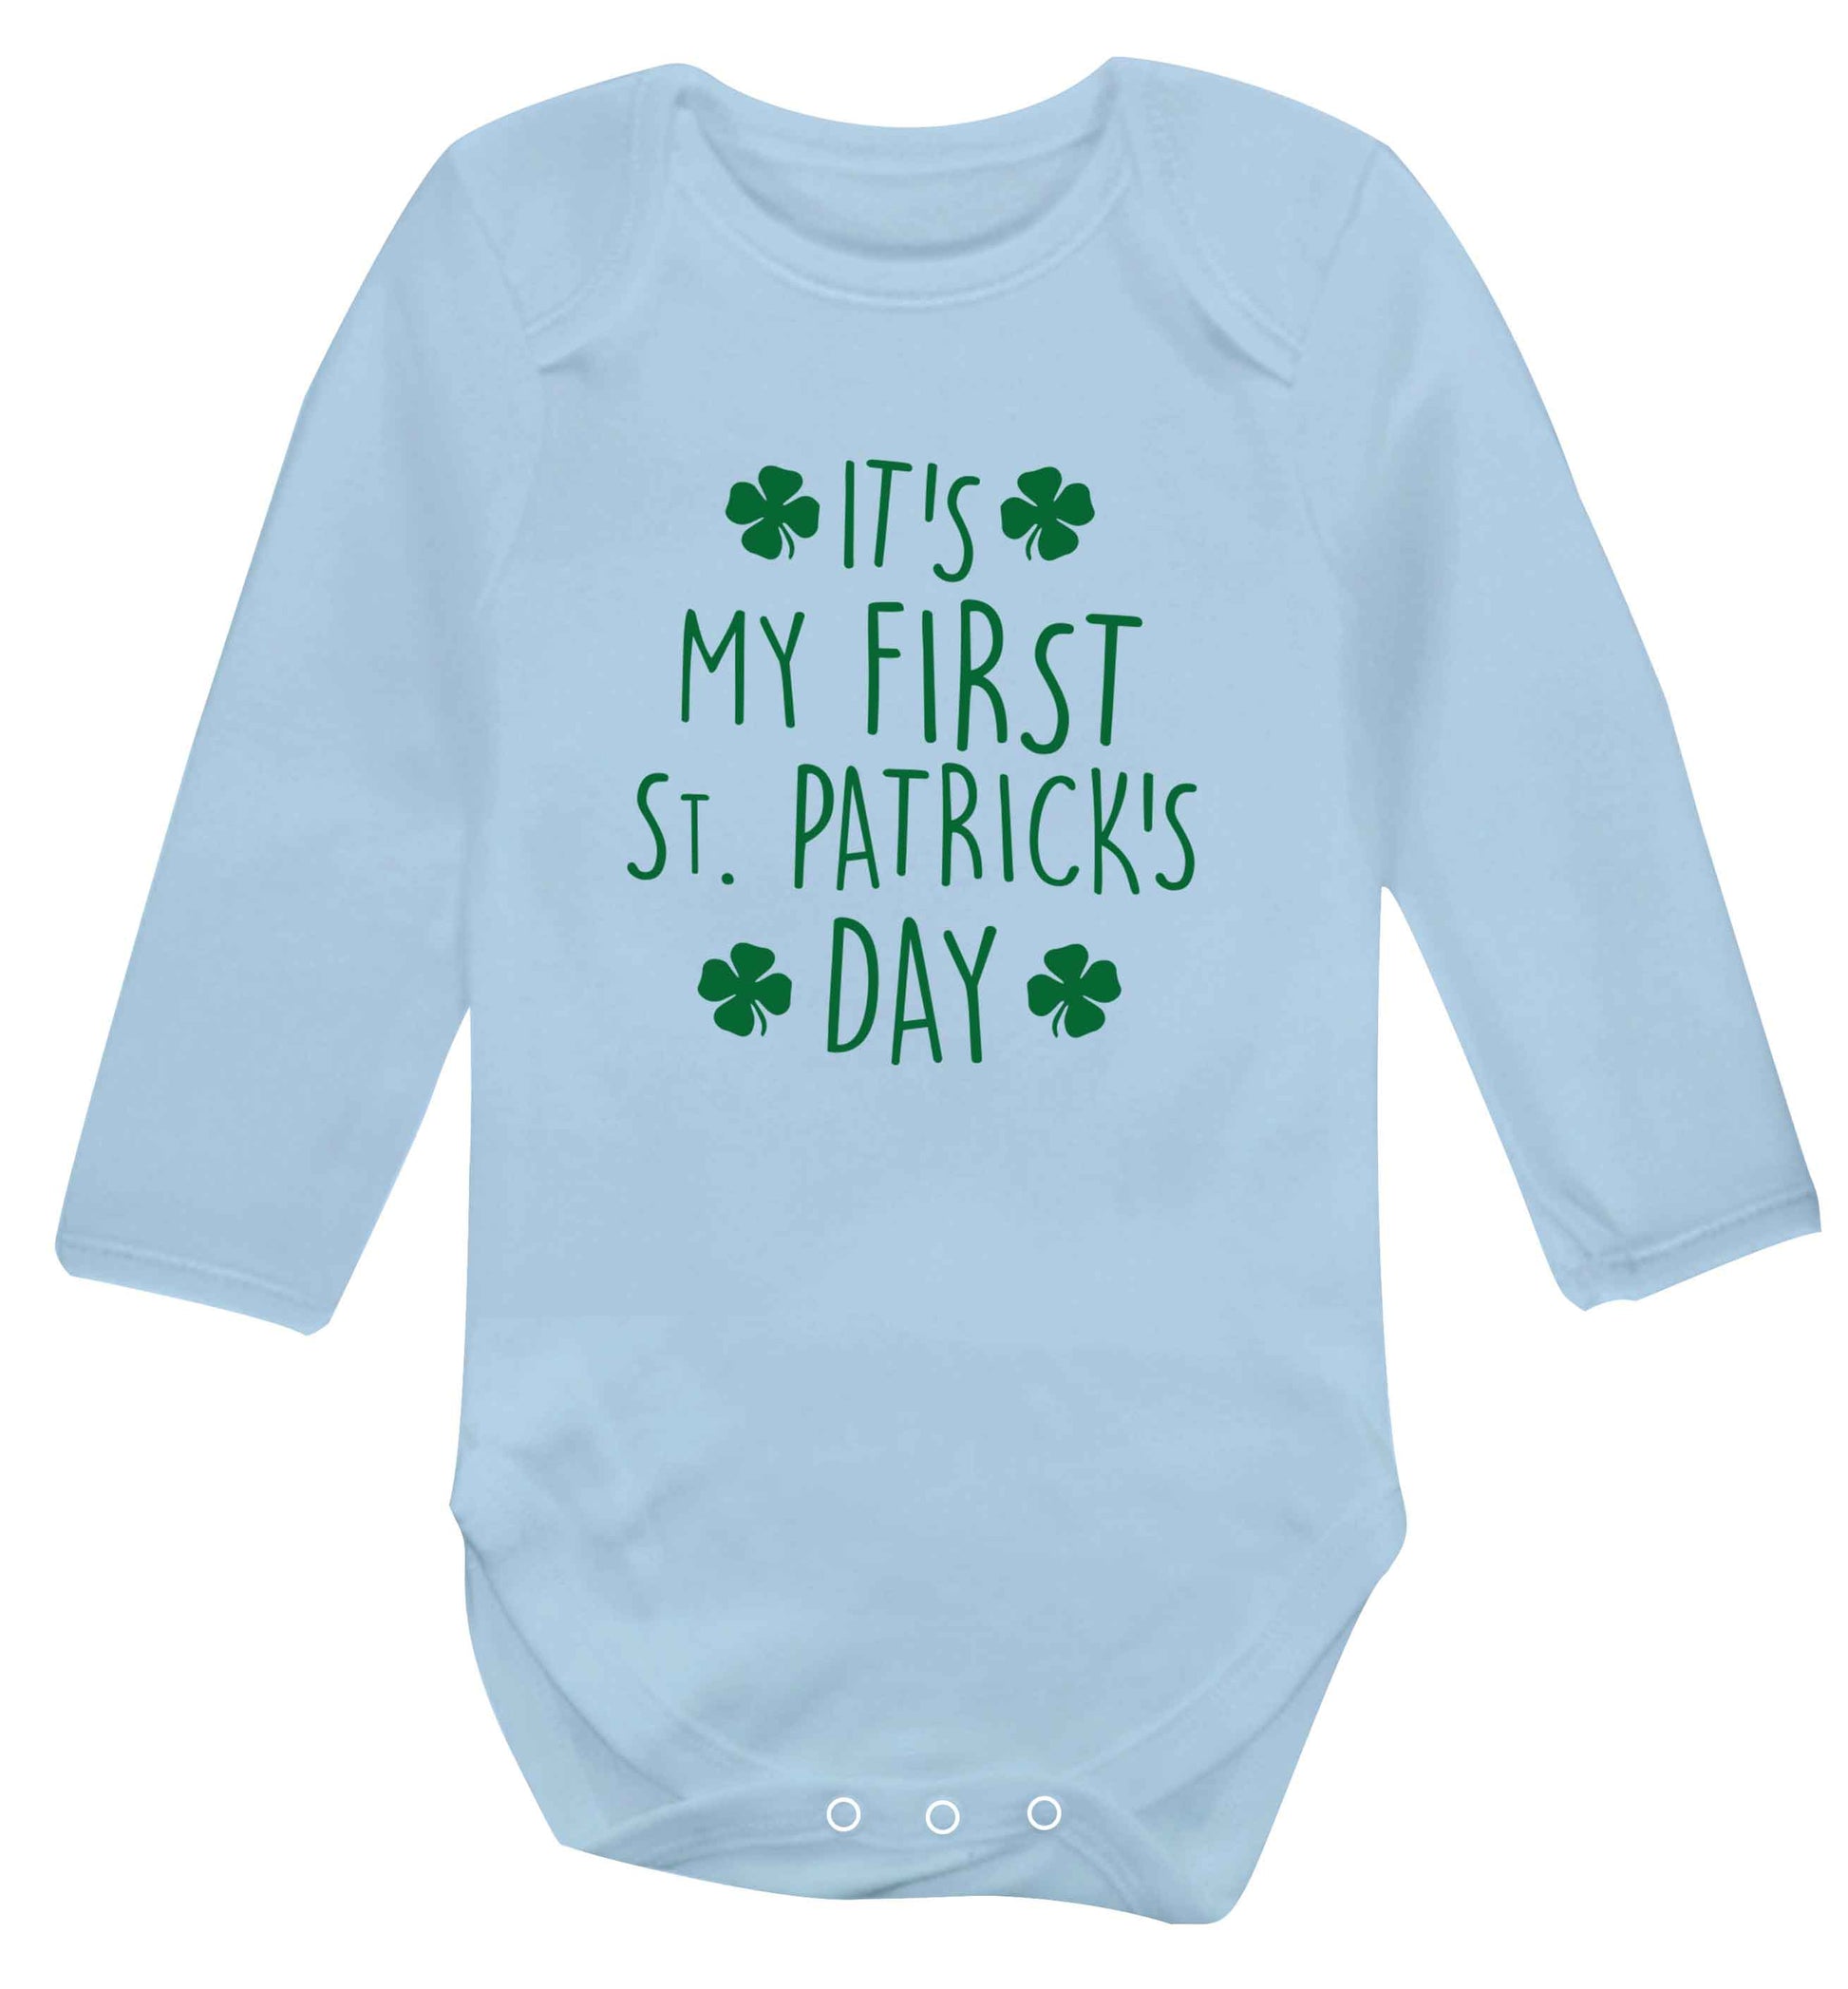 It's my first St.Patrick's day baby vest long sleeved pale blue 6-12 months